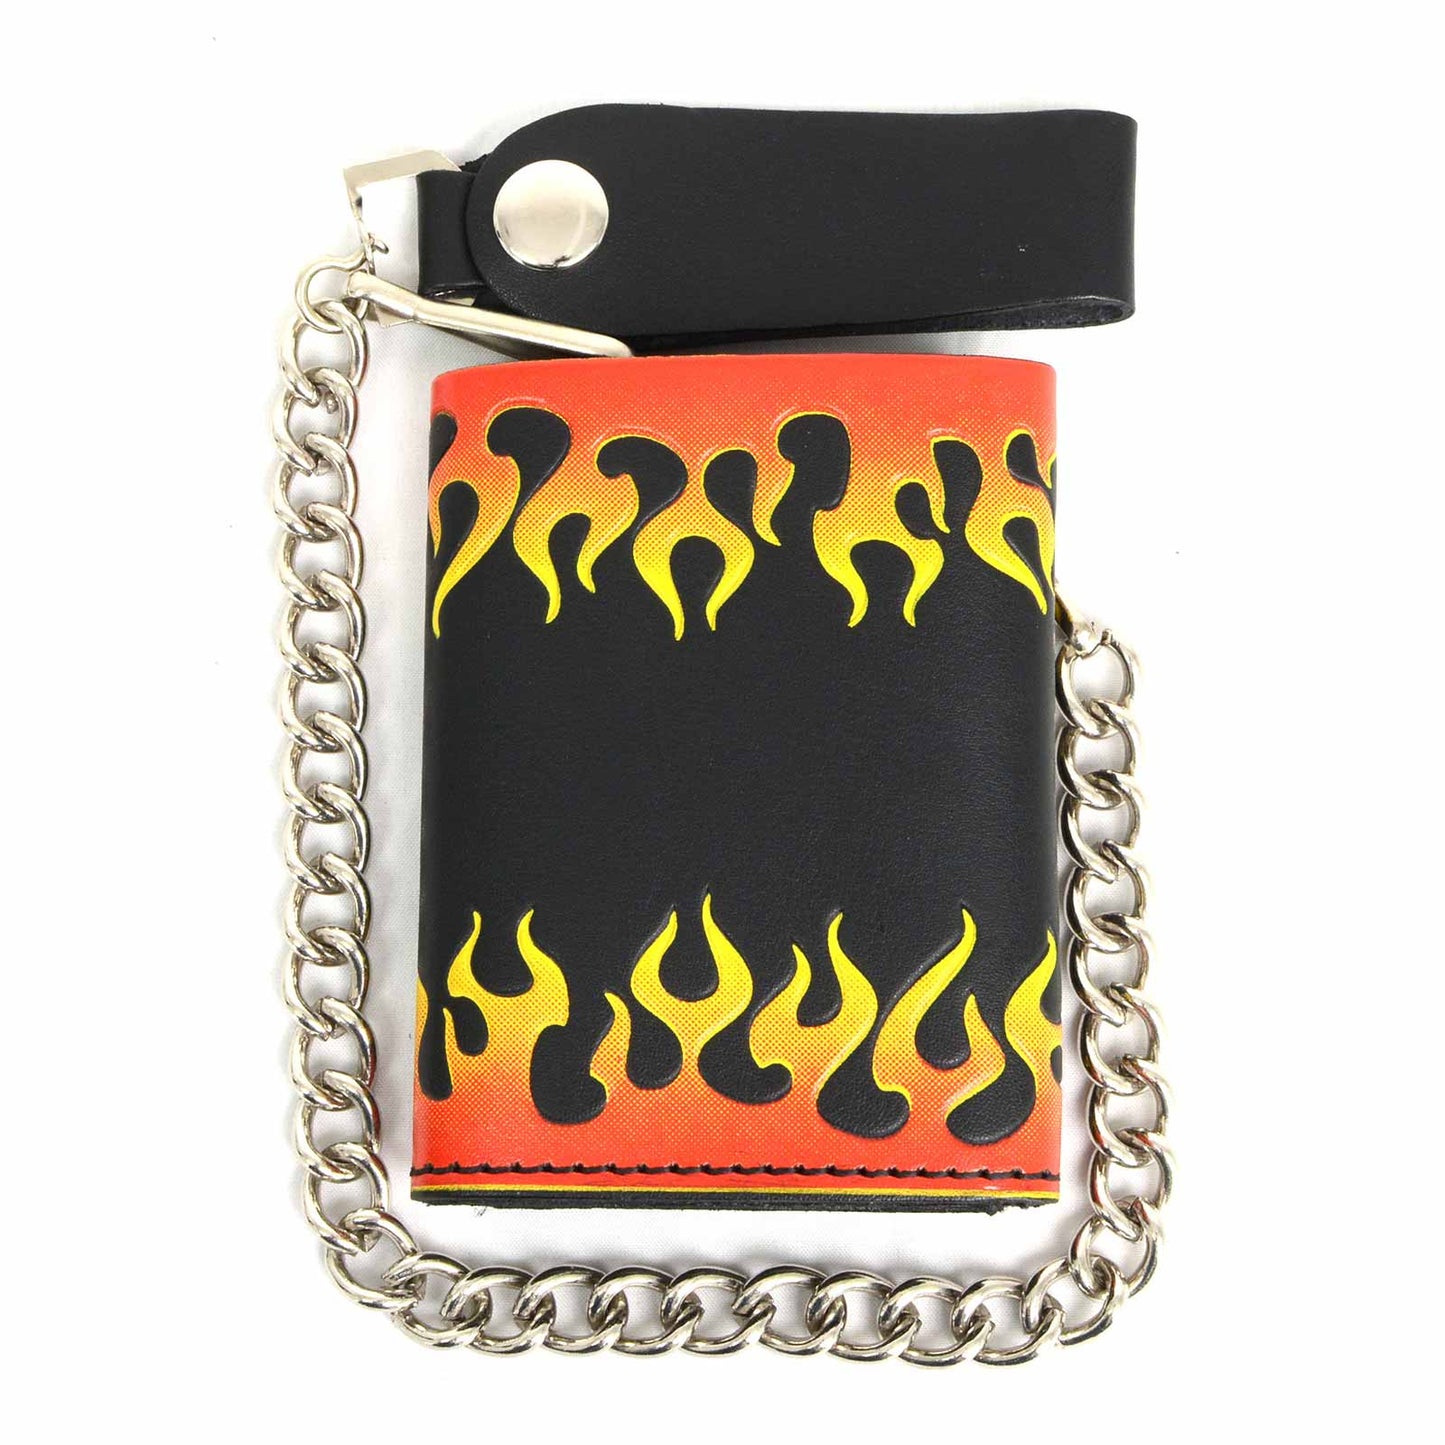 Milwaukee Leather MLW7832 Men's 4” Leather “Flamed” Tri-Fold Biker Wallet w/ Anti-Theft Stainless Steel Chain